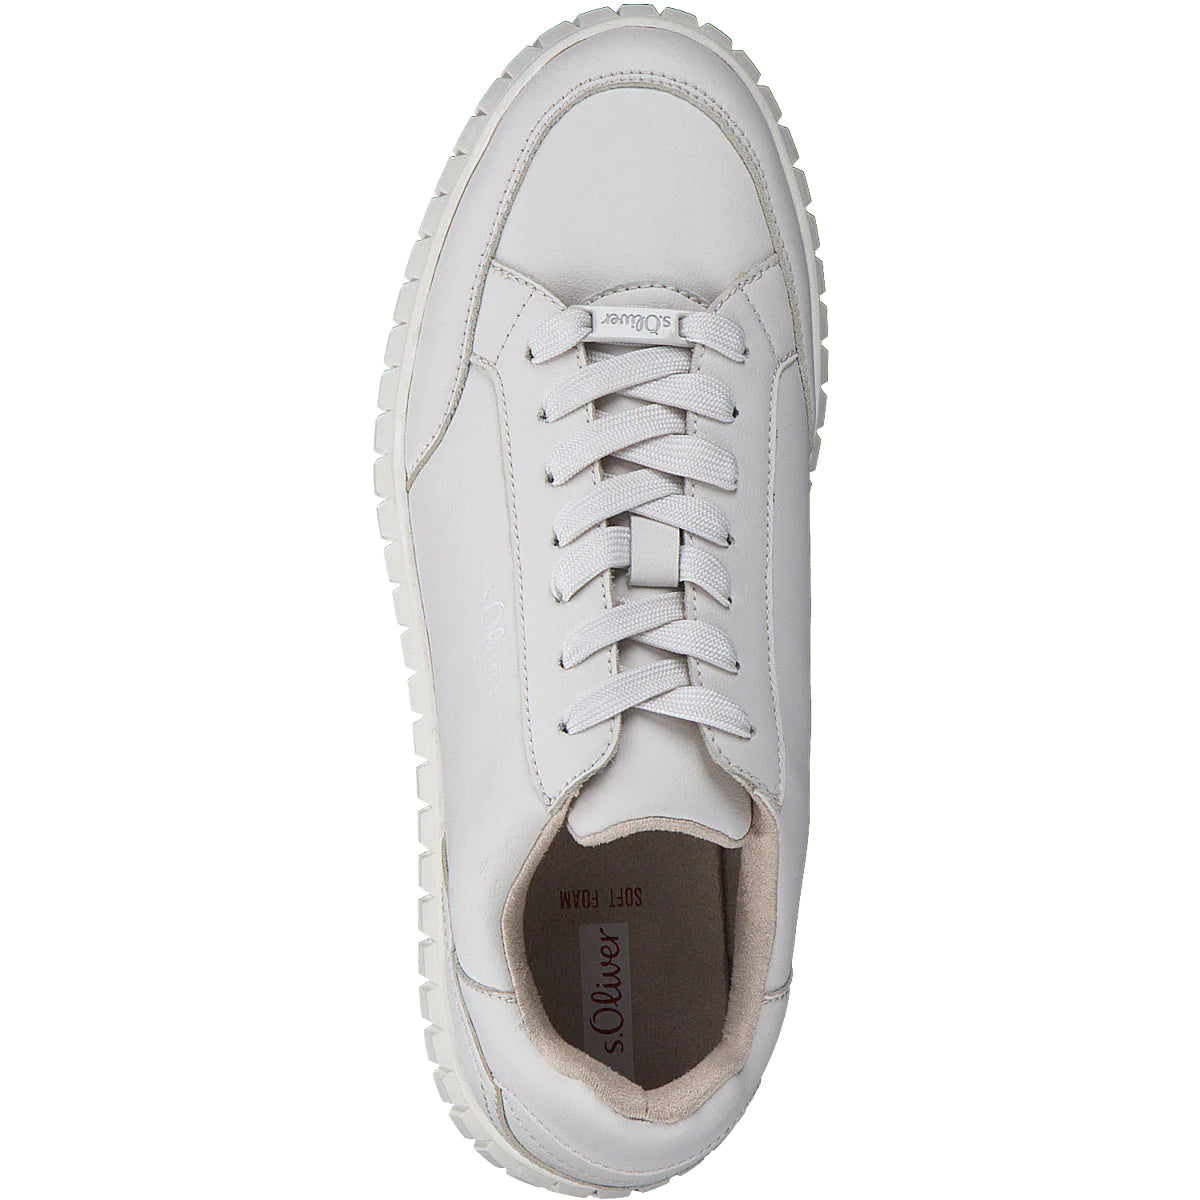 S.OLIIVER LACE-UP SNEAKERS IN GREY